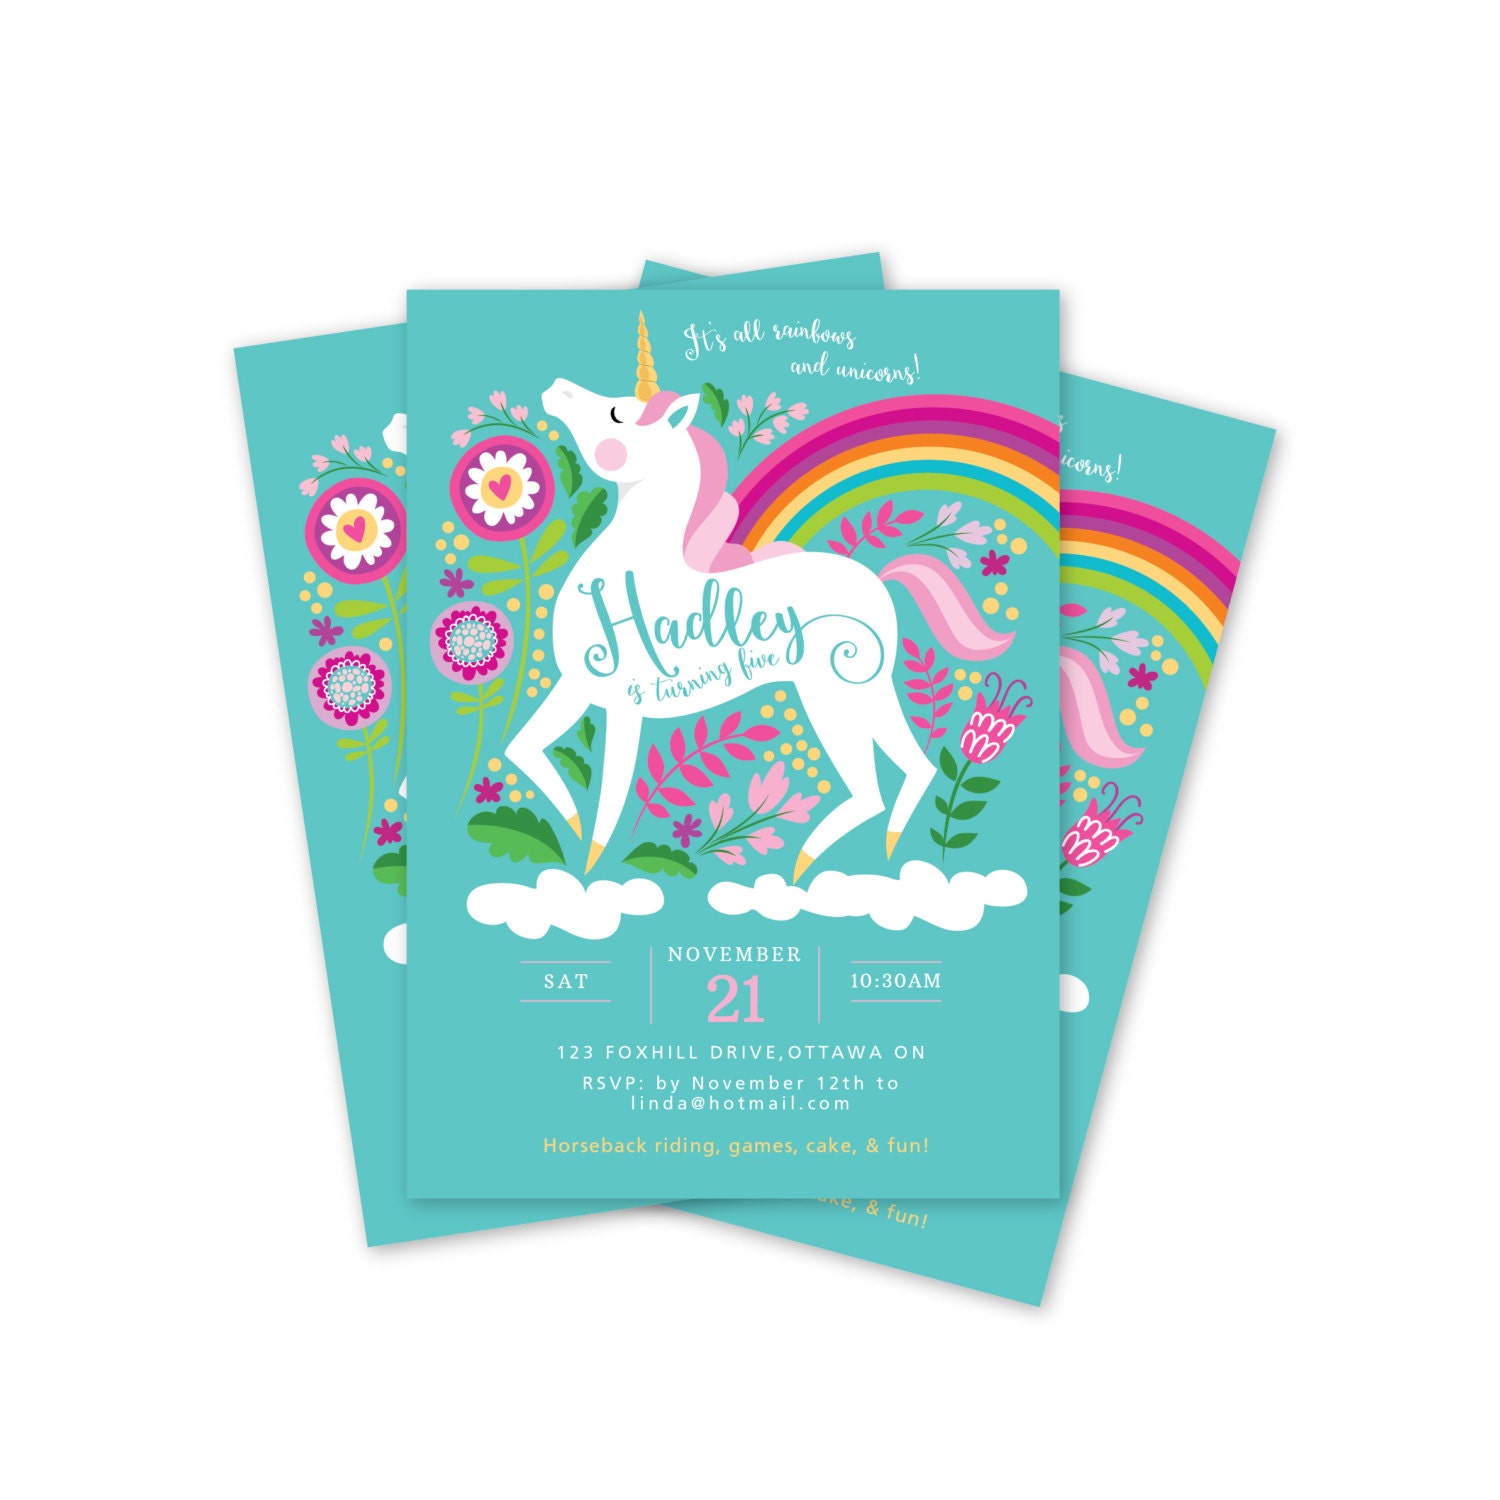 Customized Party Invitations Free 7